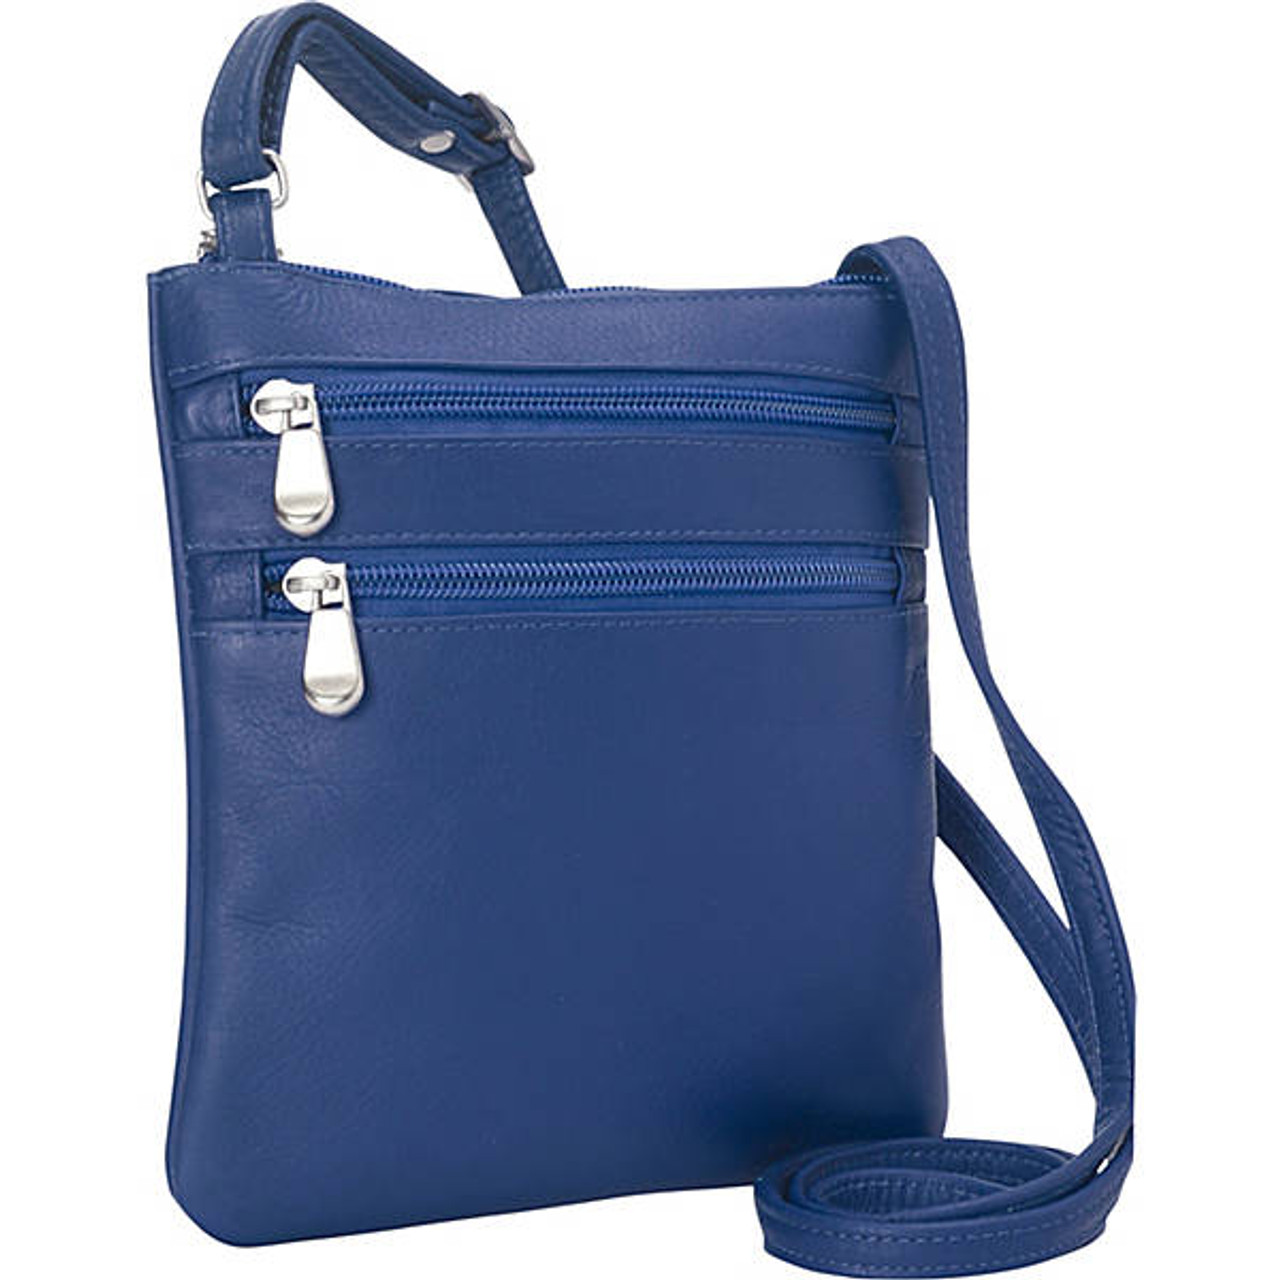 Le Donne Leather Two Zip Mini Crossbody Bag